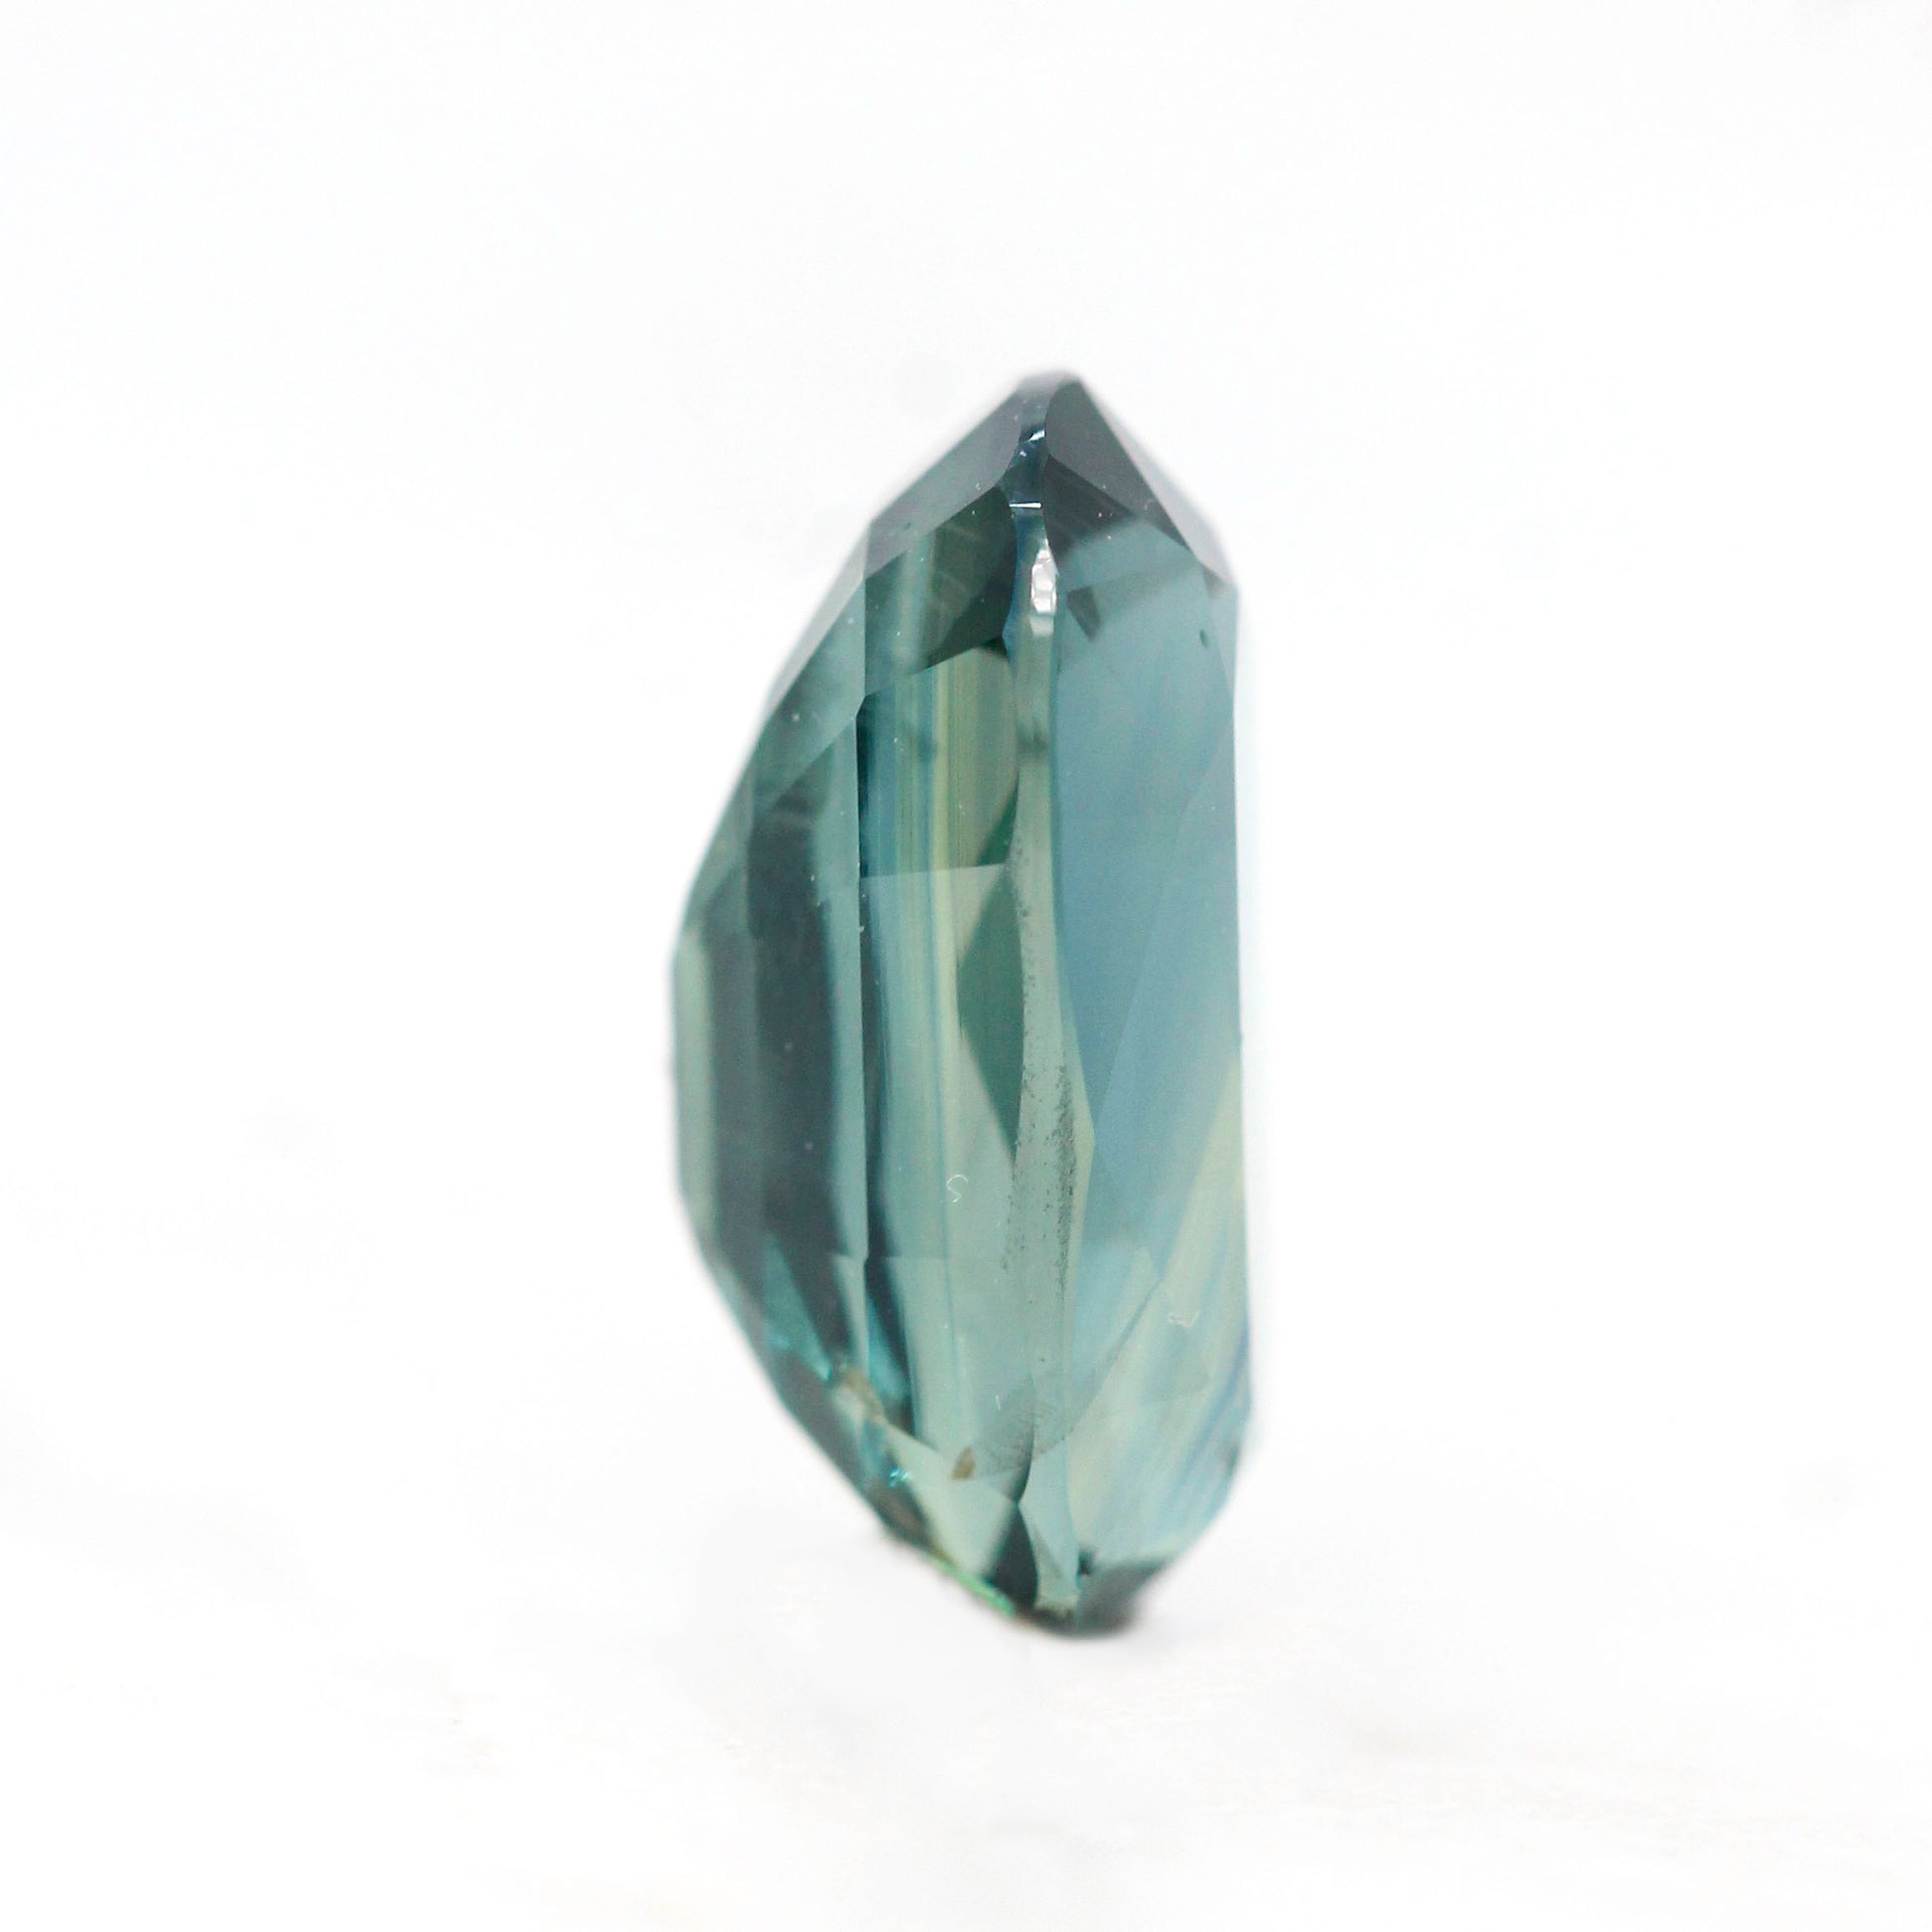 2.80 Carat Teal Elongated Oval Sapphire for Custom Work - Inventory Code TEOS280 - Midwinter Co. Alternative Bridal Rings and Modern Fine Jewelry